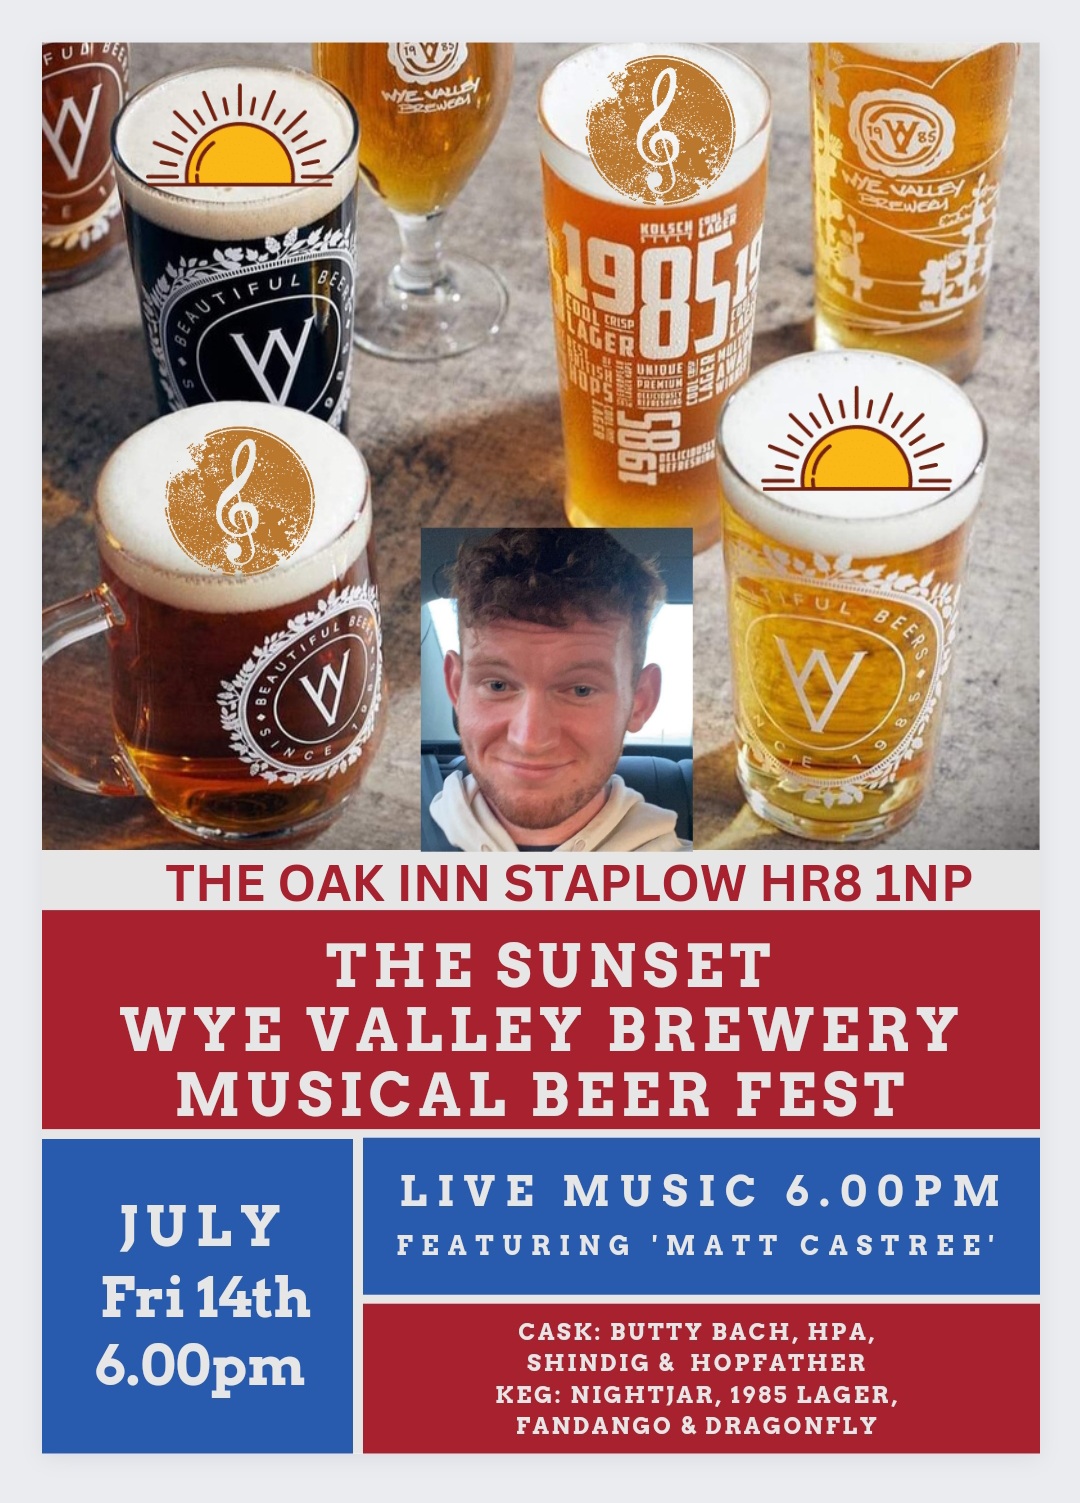 THE SUNSET WYE VALLEY BREWERY SUMMER MUSICAL BEER FEST HR8 1NP from Fri July 14th